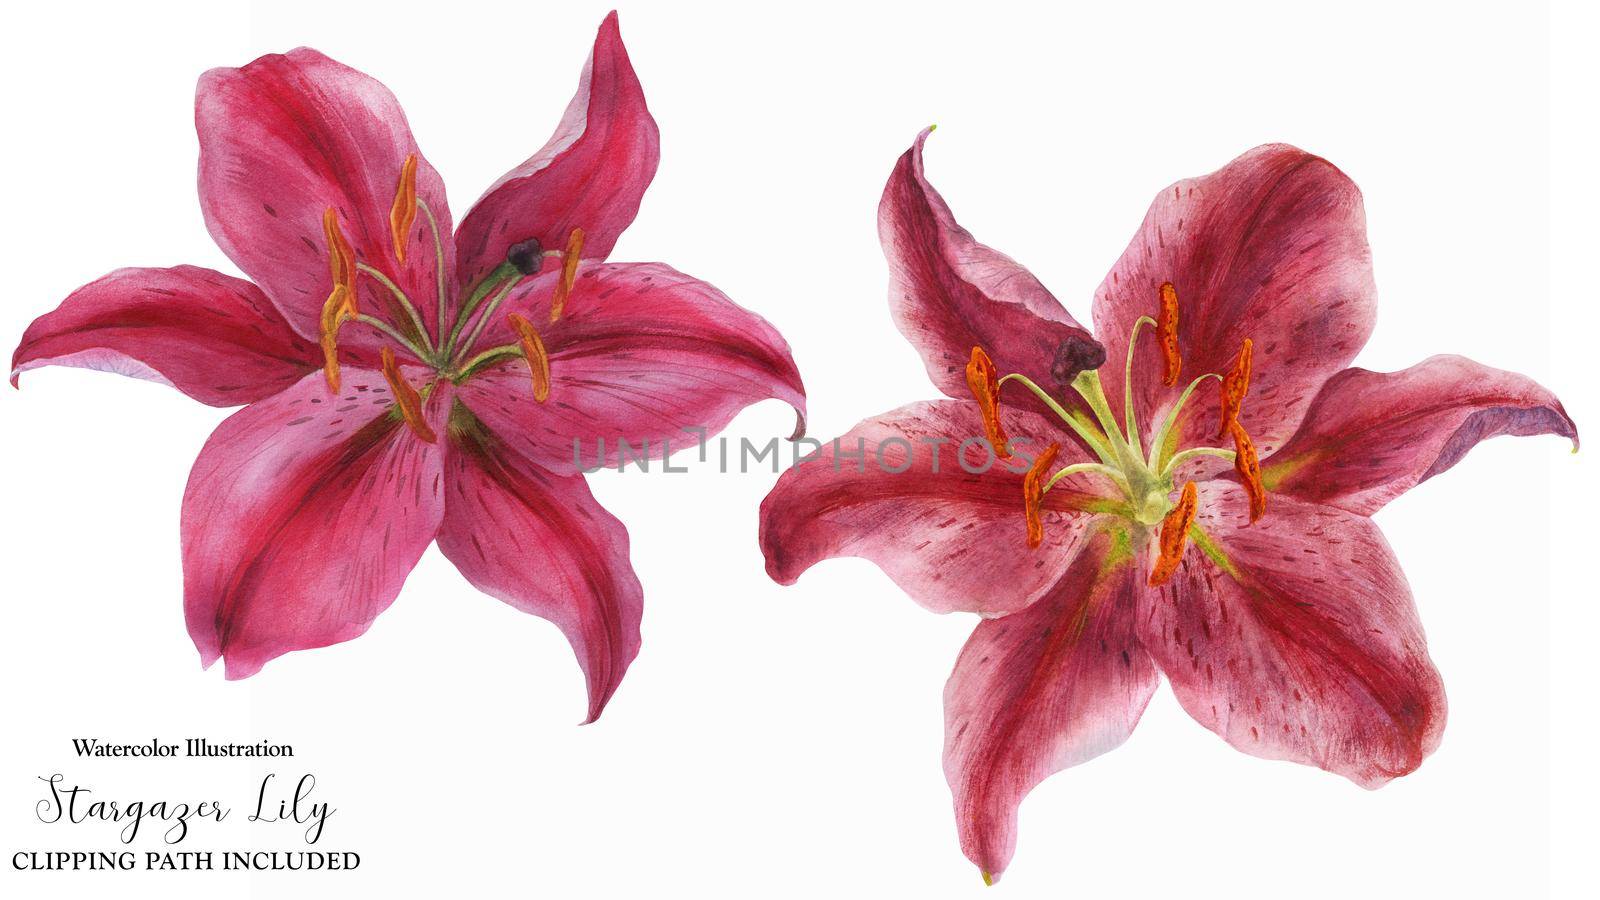 Pink Lily Stargazer, watercolor isolated flowers with clipping path